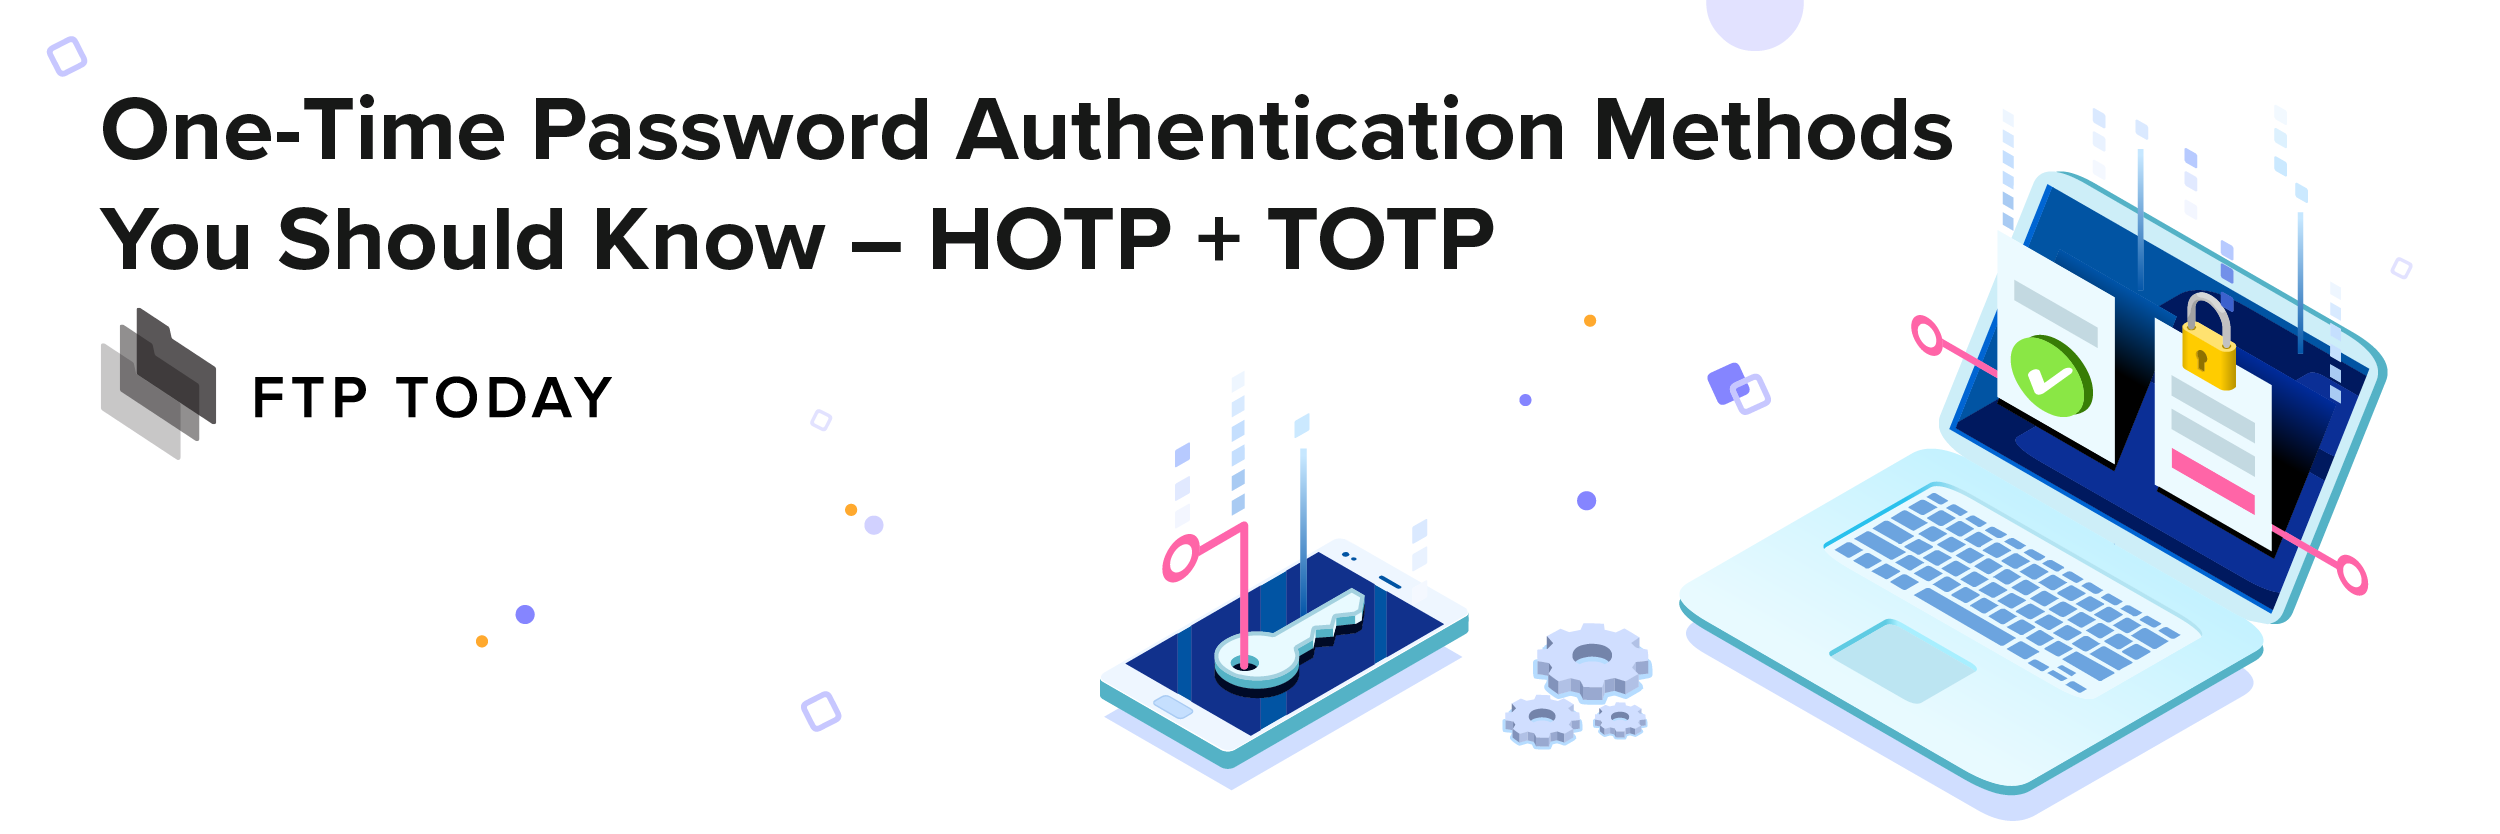 One-Time Password (OTP) Authentication Methods You Should Know – HOTP + TOTP